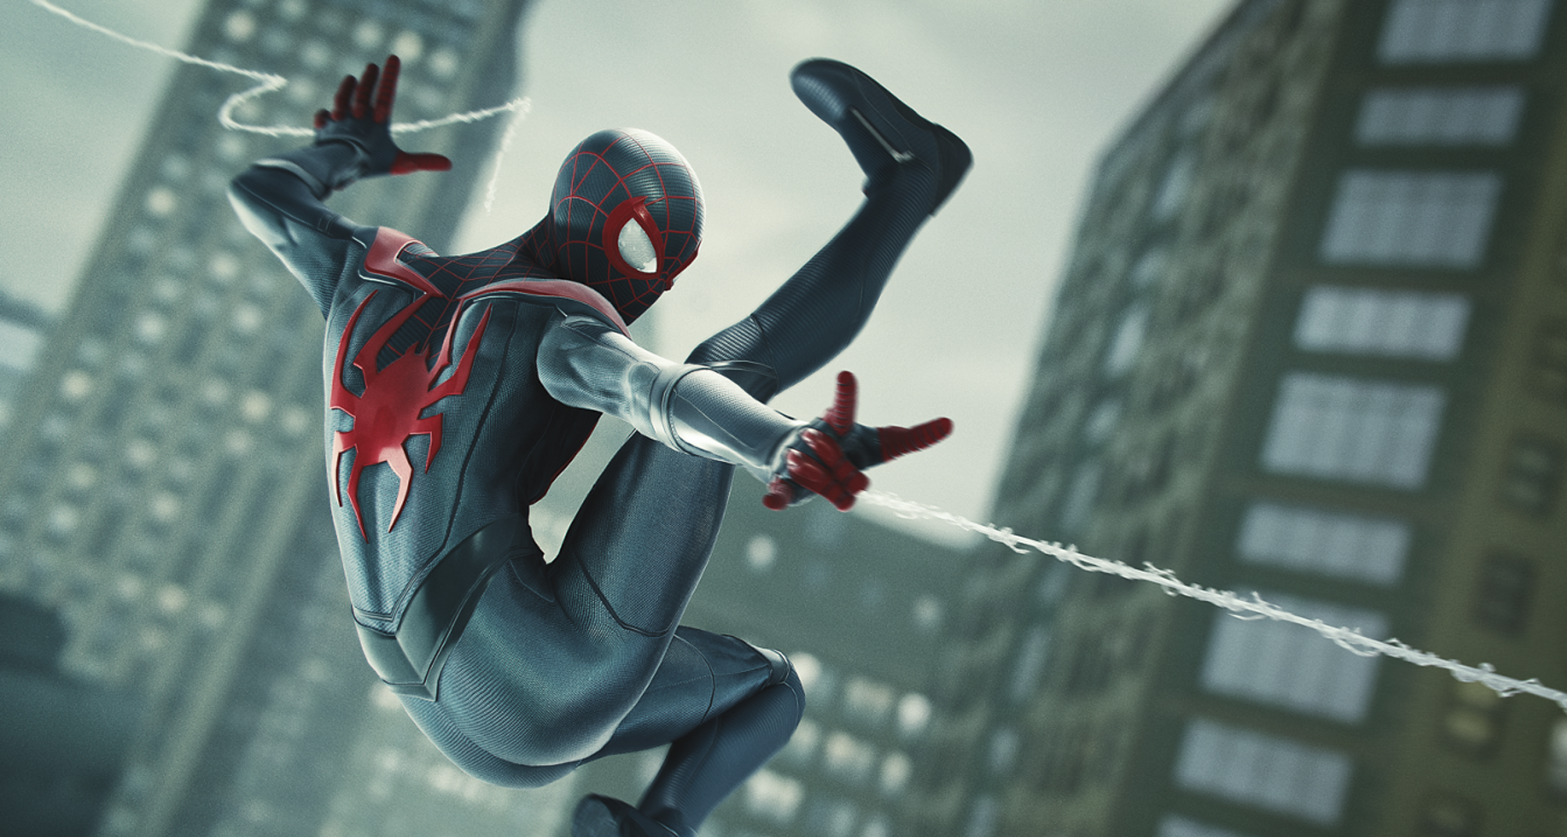 Miles Morales swings into action in his very own video game. (Image: Sony/Insomniac Games)